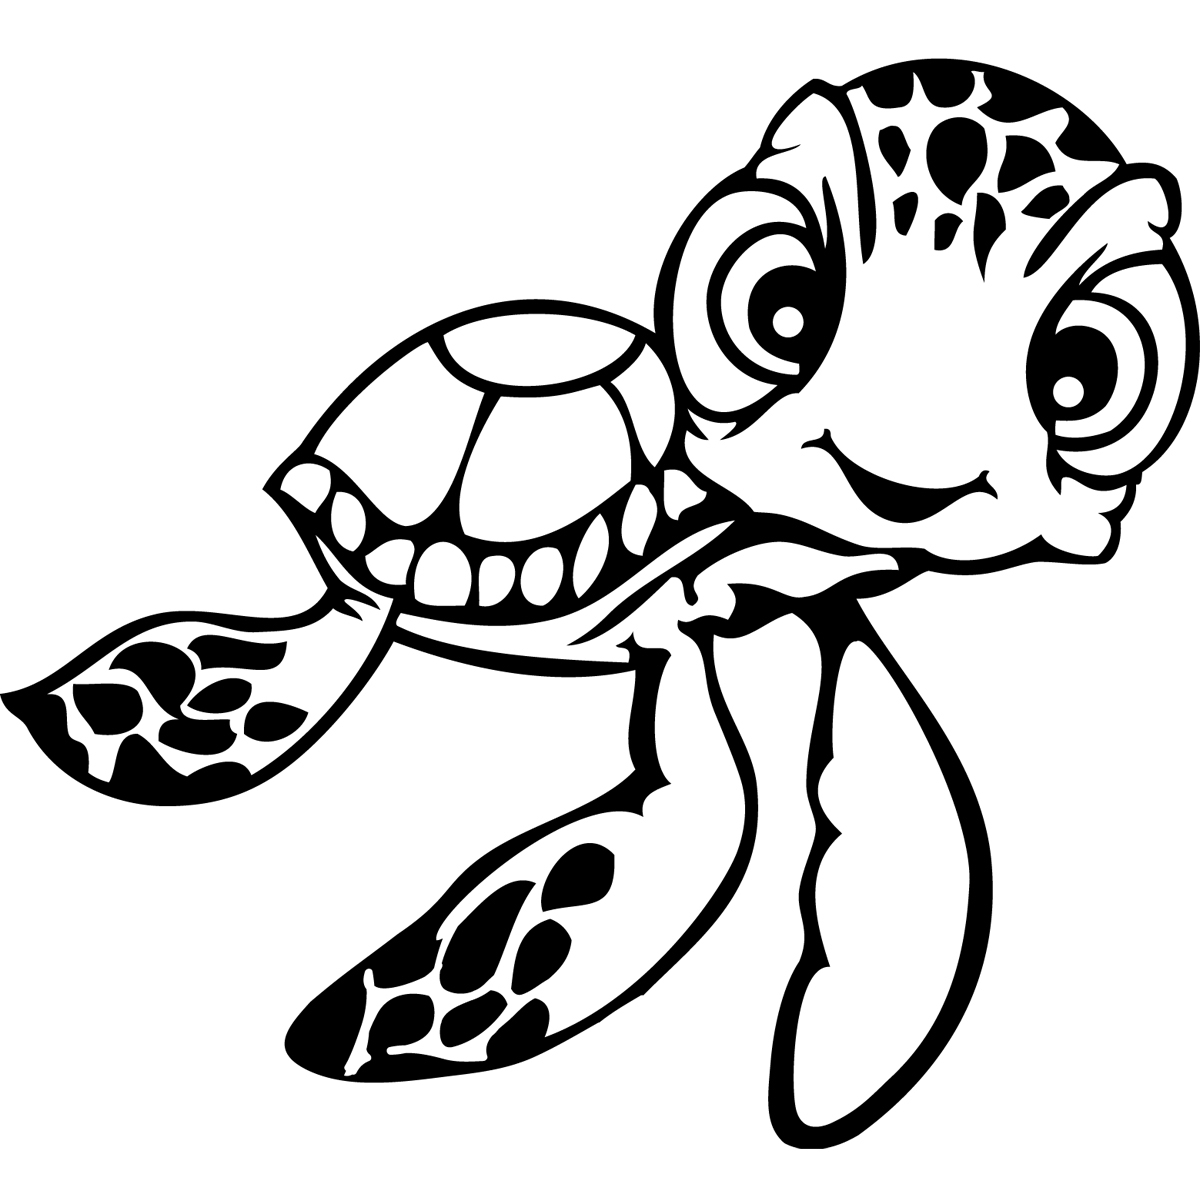 Disney Nemo Coloring Pages at GetColorings.com | Free ...